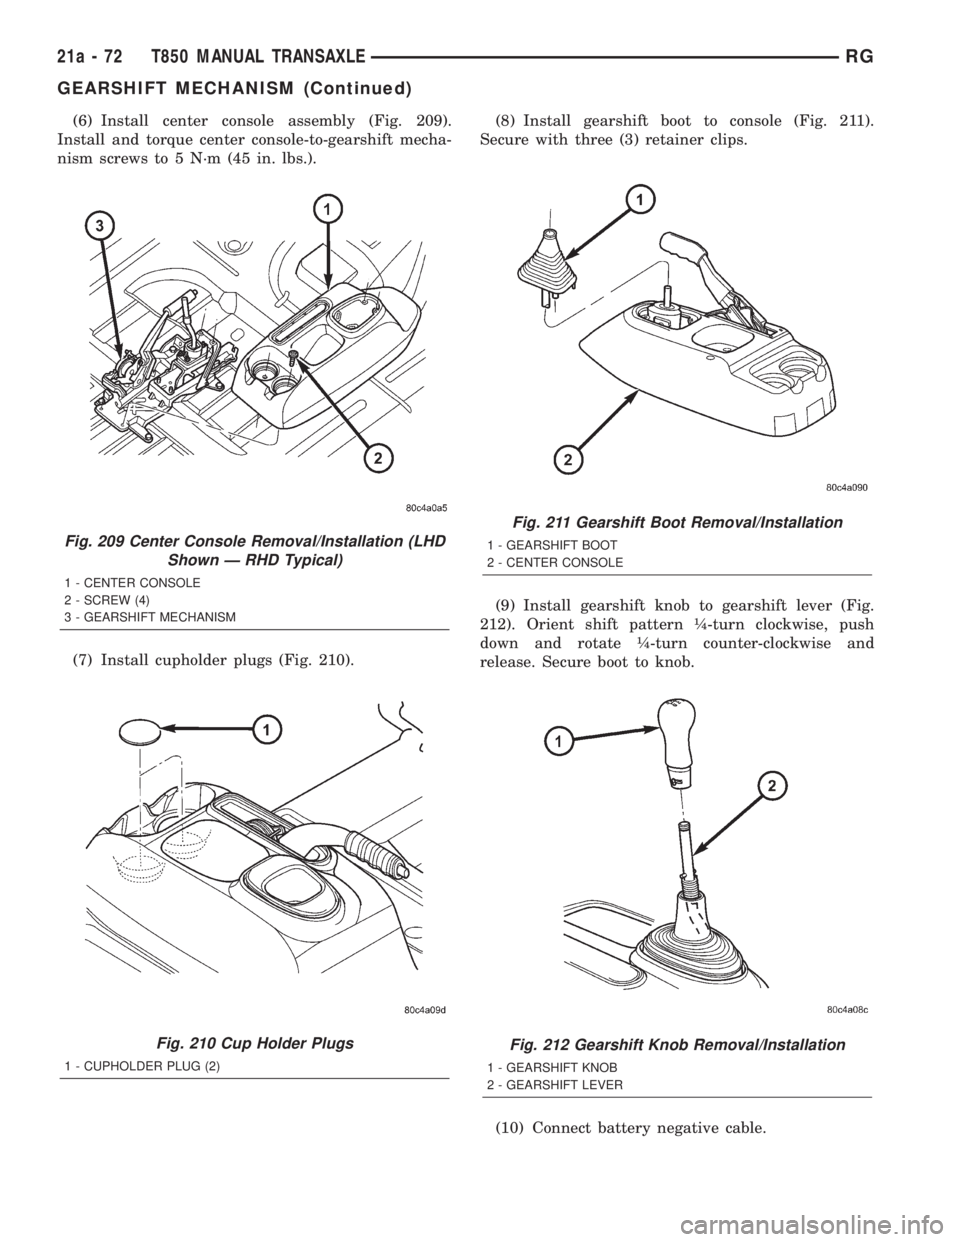 CHRYSLER VOYAGER 2001  Service Manual (6) Install center console assembly (Fig. 209).
Install and torque center console-to-gearshift mecha-
nism screws to 5 N´m (45 in. lbs.).
(7) Install cupholder plugs (Fig. 210).(8) Install gearshift 